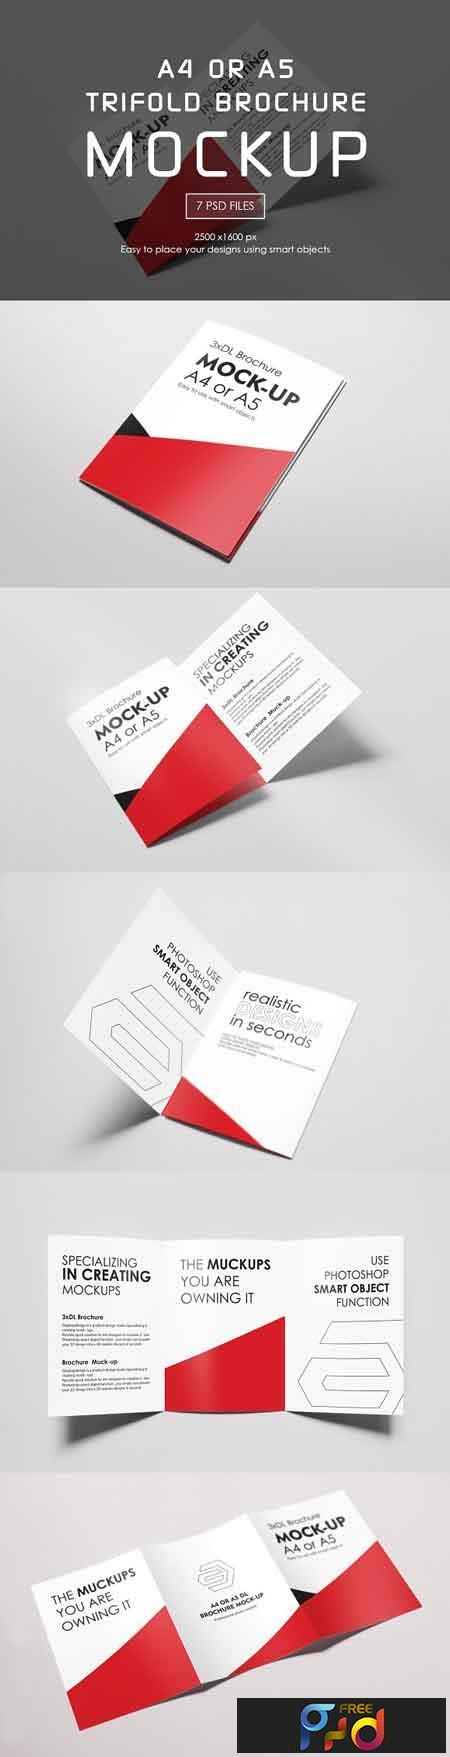 A4 or A5 Trifold Mockups 3210840 - FreePSDvn